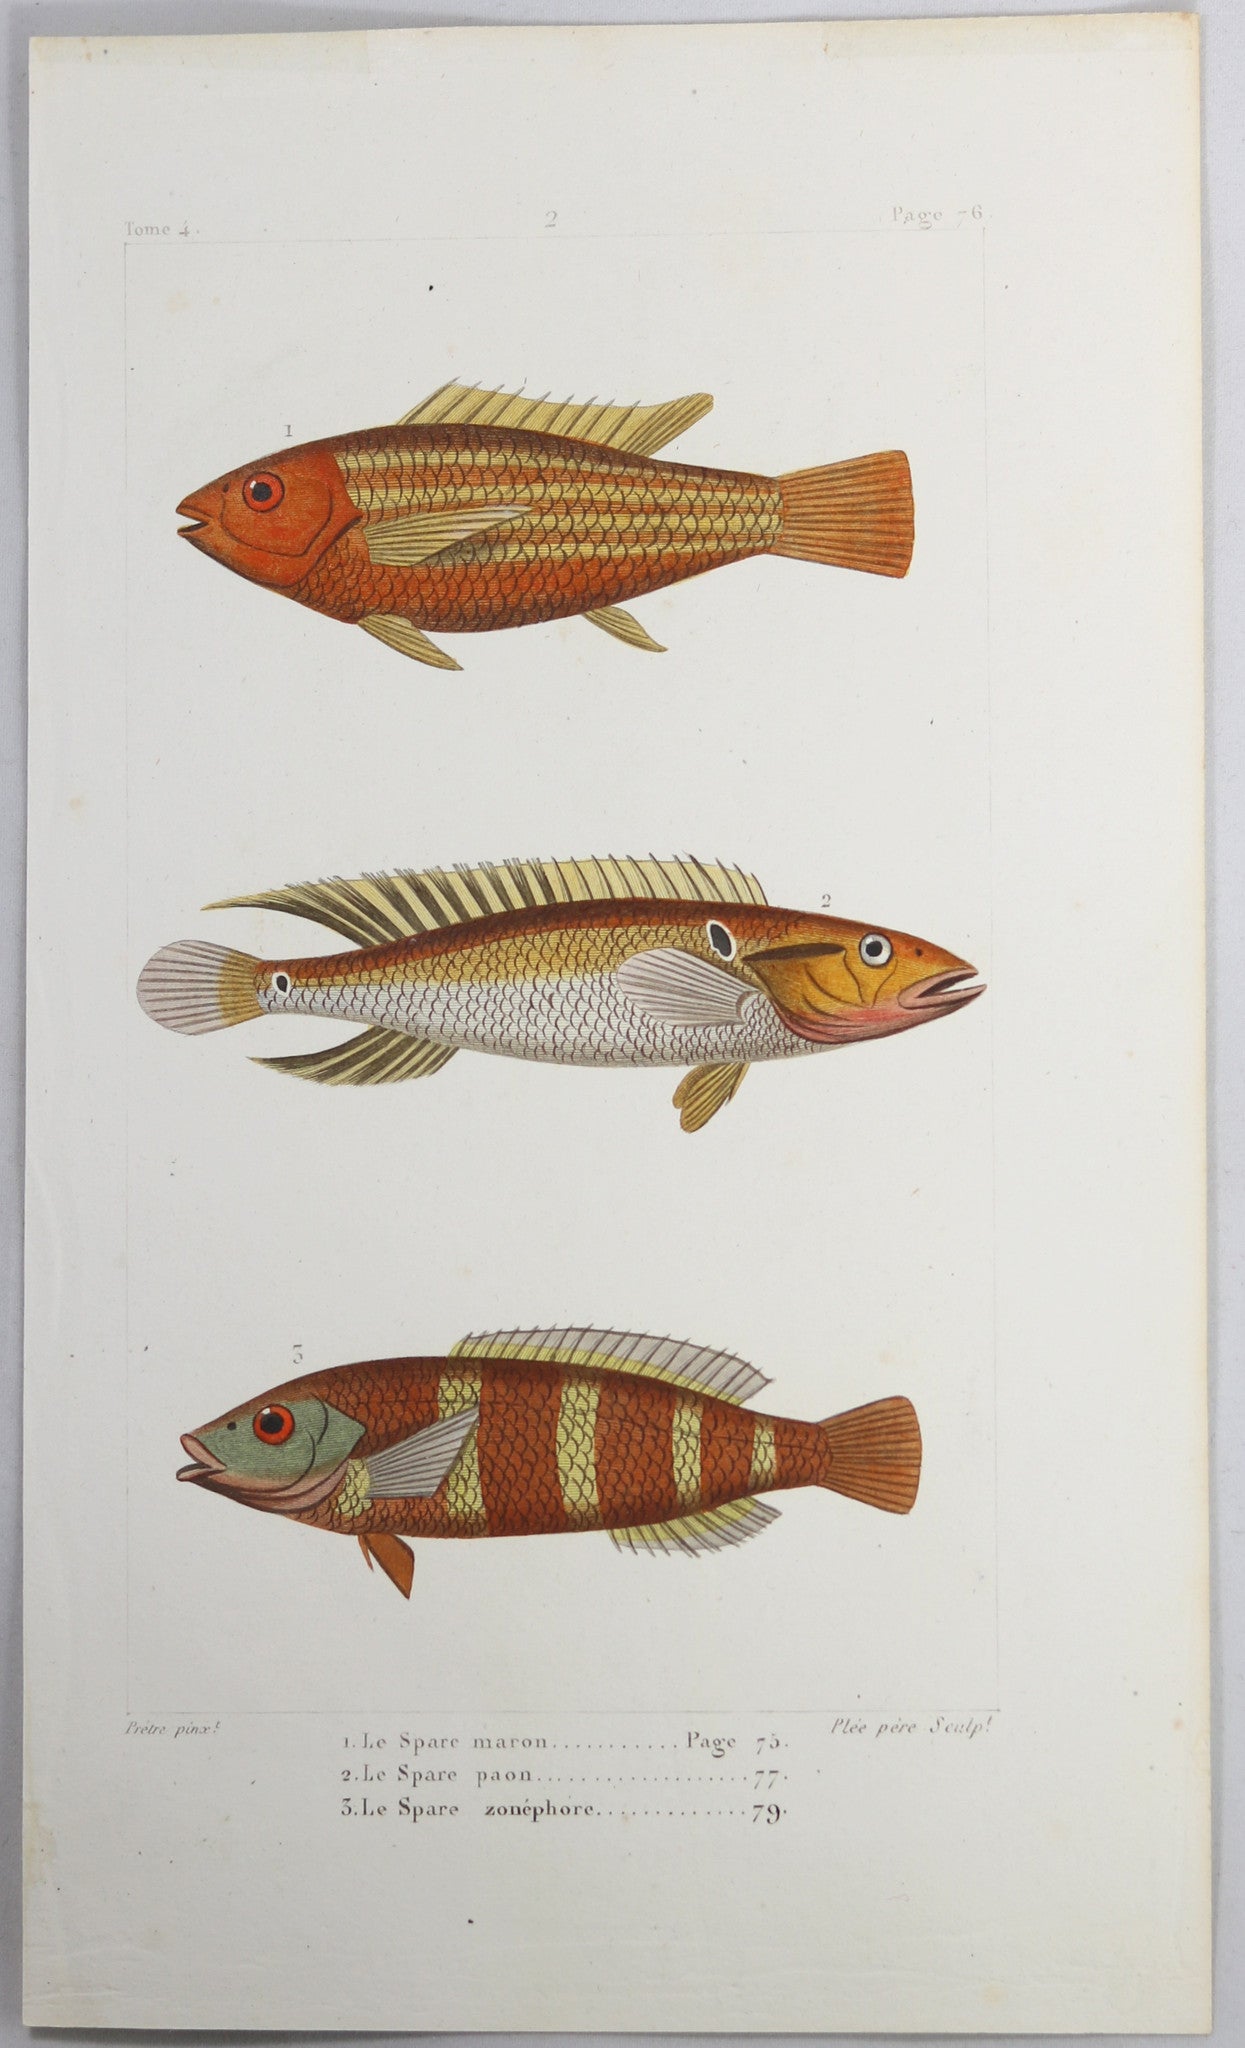 @1819 French Prêtre fish print with 3 species bream